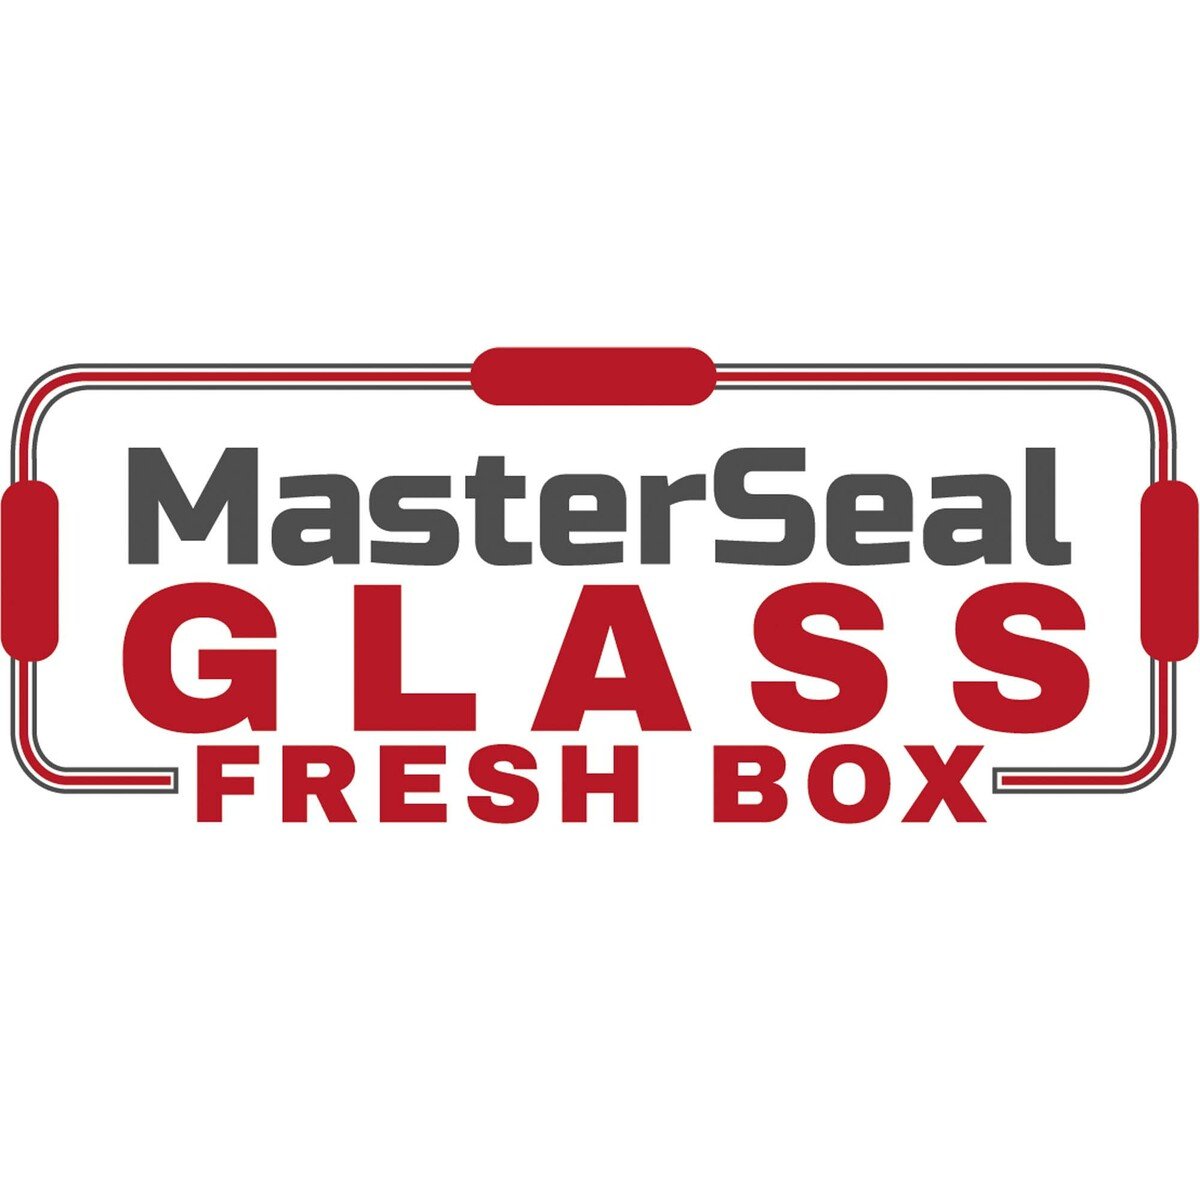 Tefal Masterseal Food Keeper Glass Rectangle 1.3Ltr